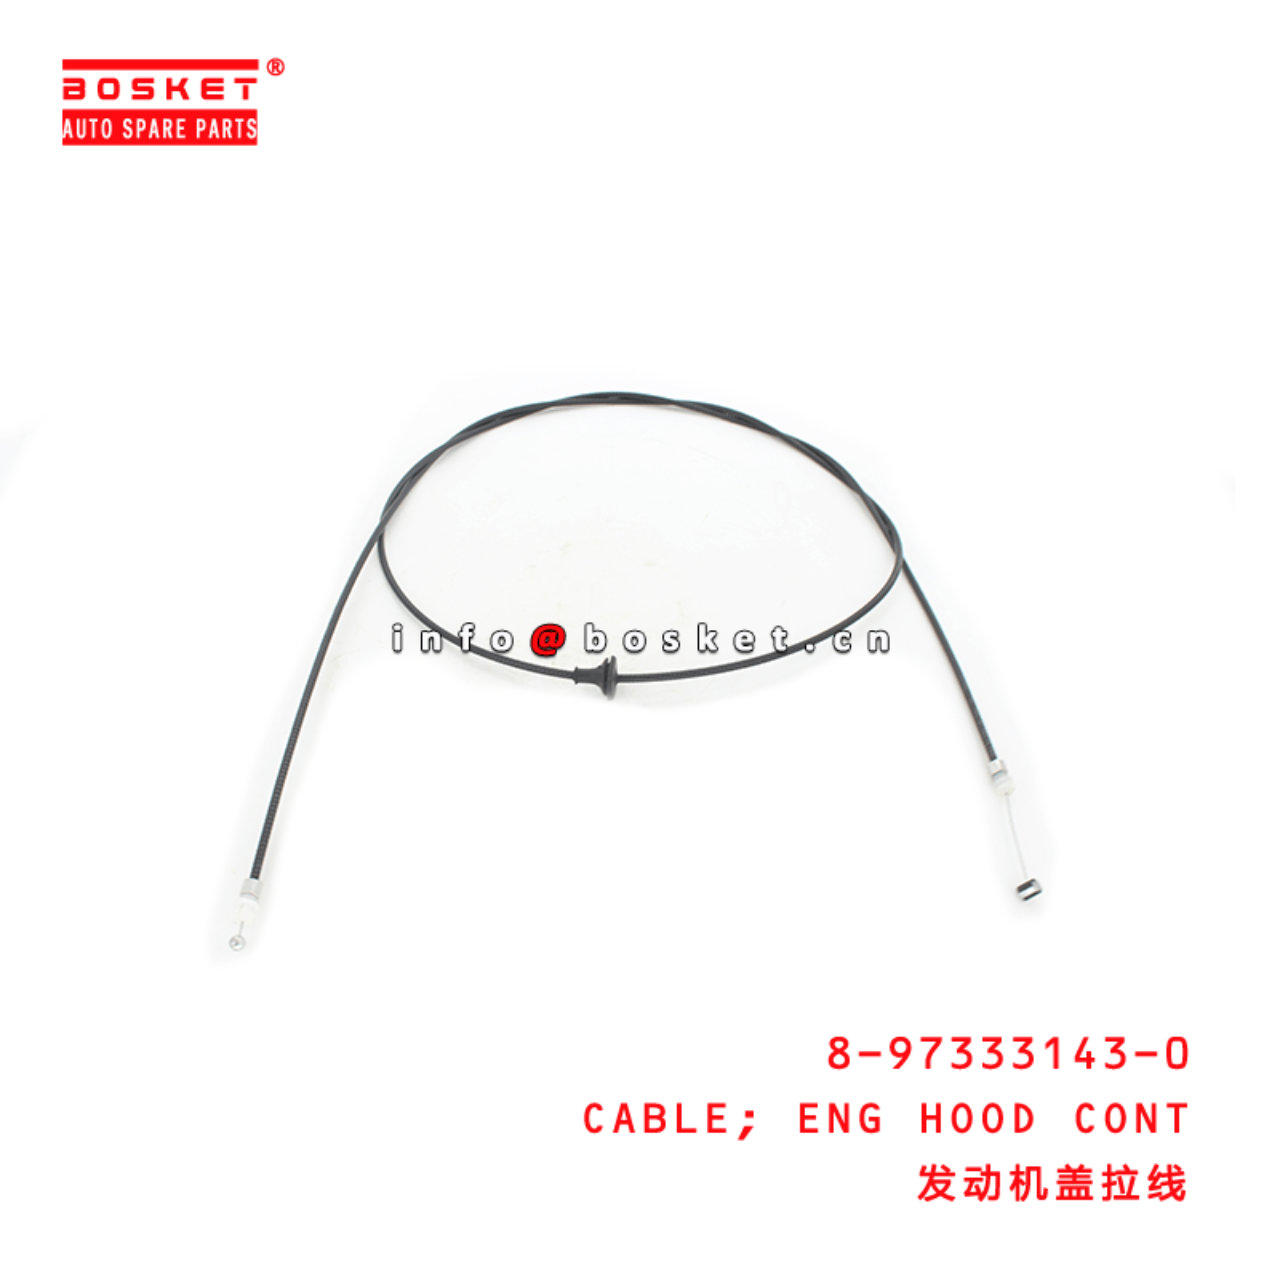 8-97333143-0 Engine Hood Control Cable 8973331430 Suitable for ISUZU D-MAX